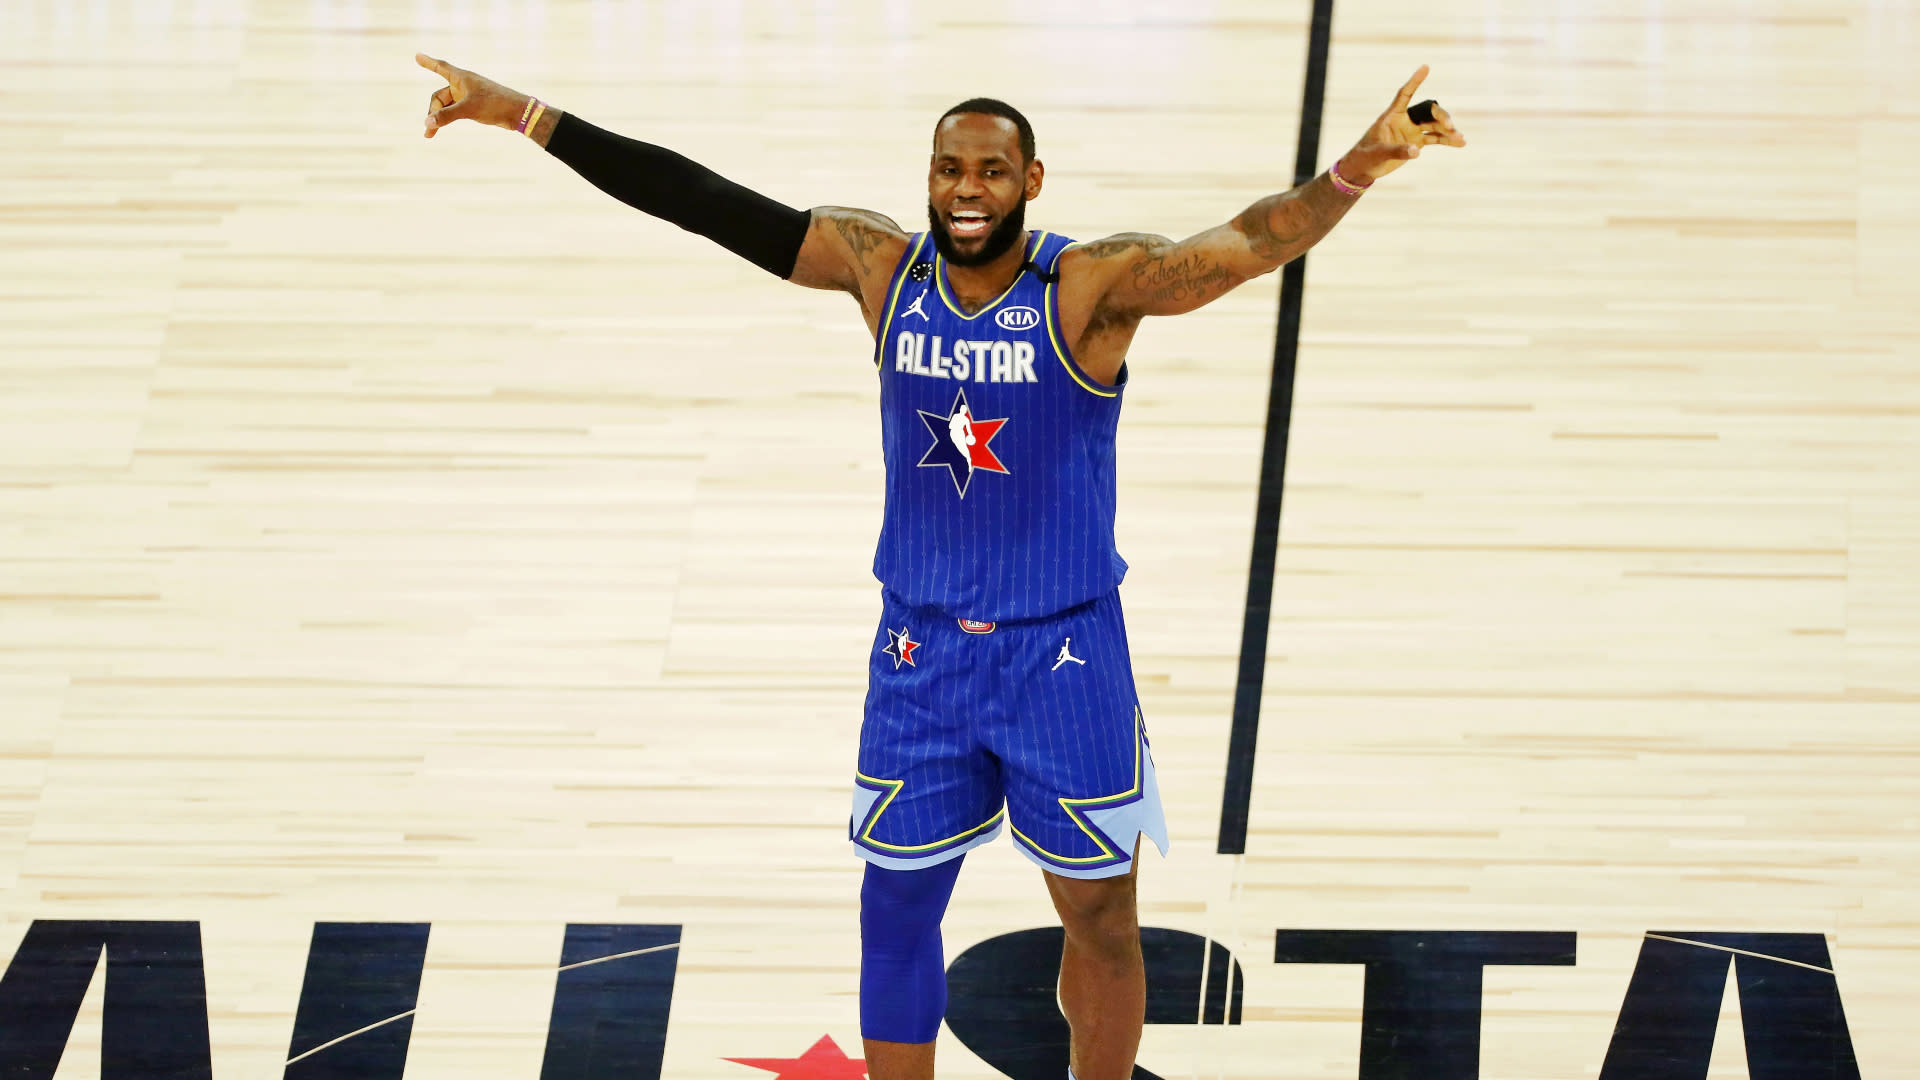 NBA All-Star Game locations: 2021, 2022 and beyond